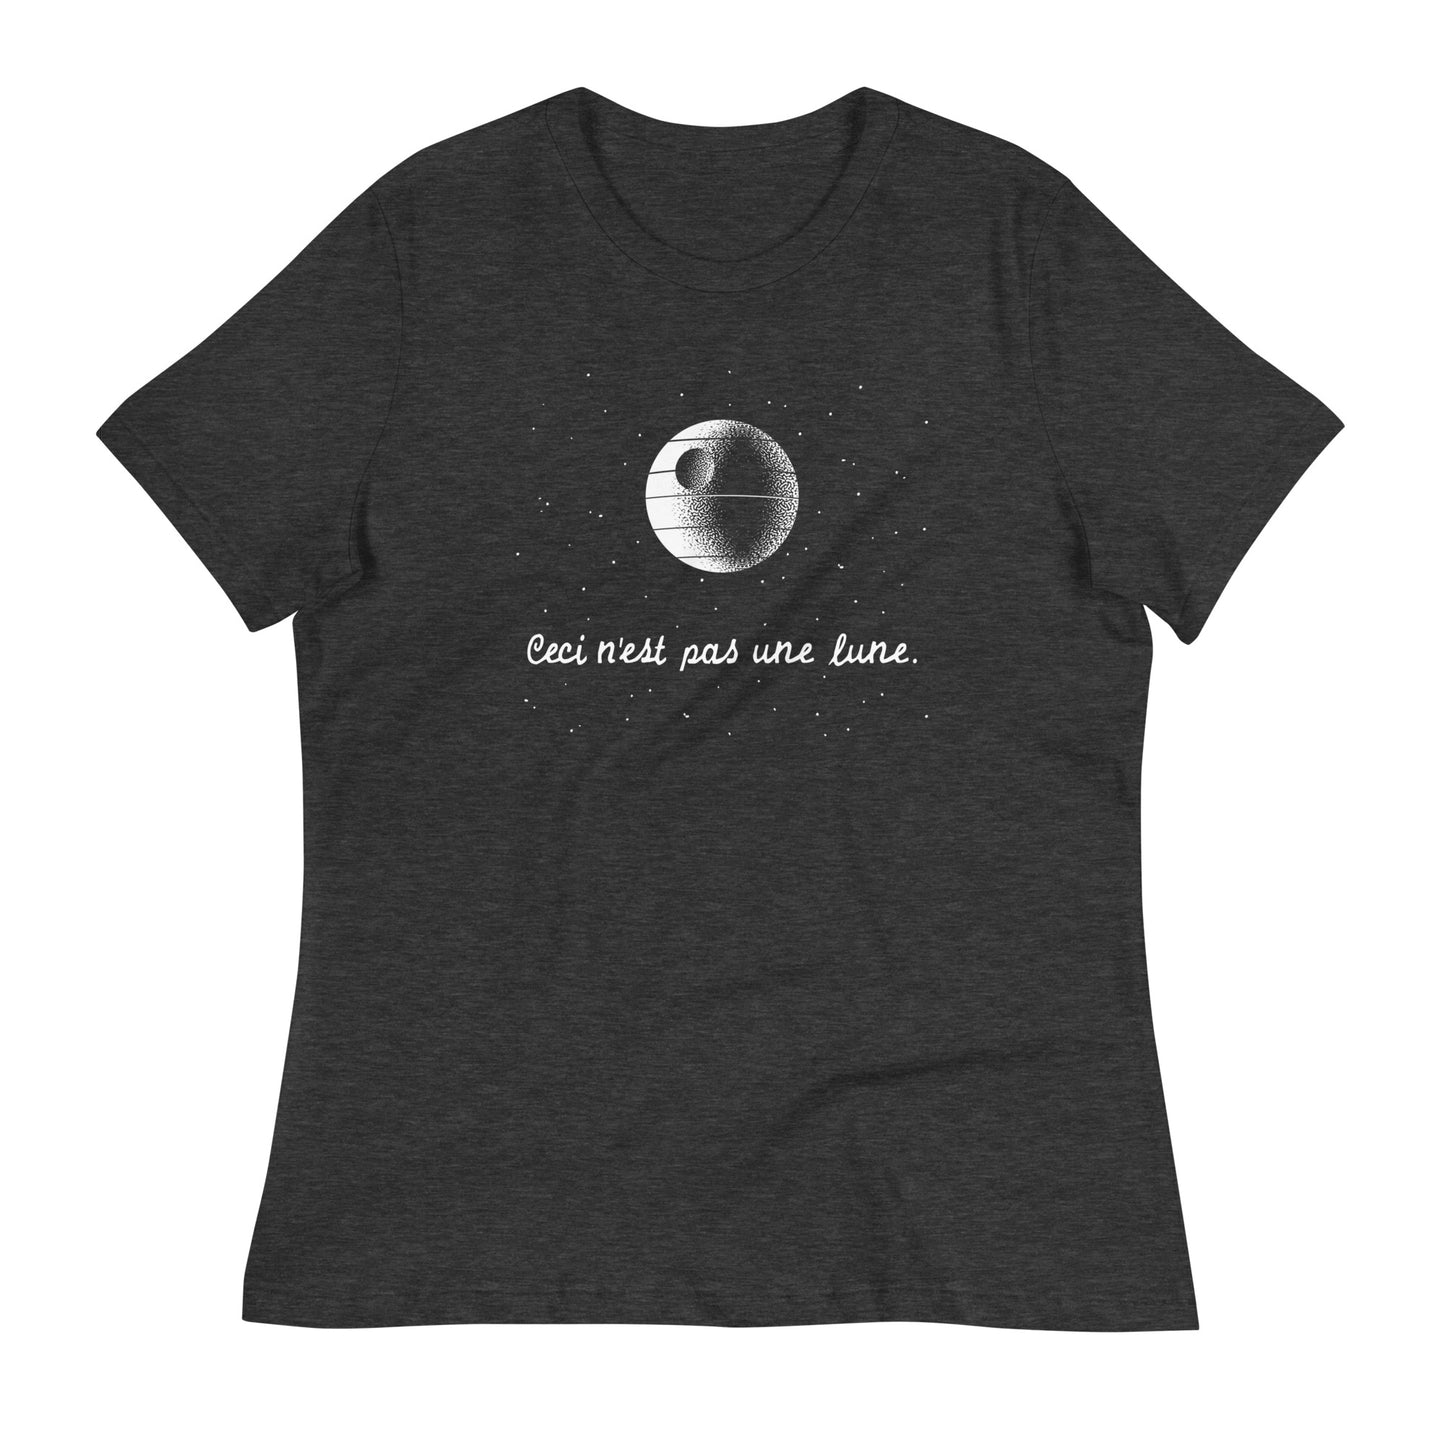 This Is Not A Moon Women's Signature Tee